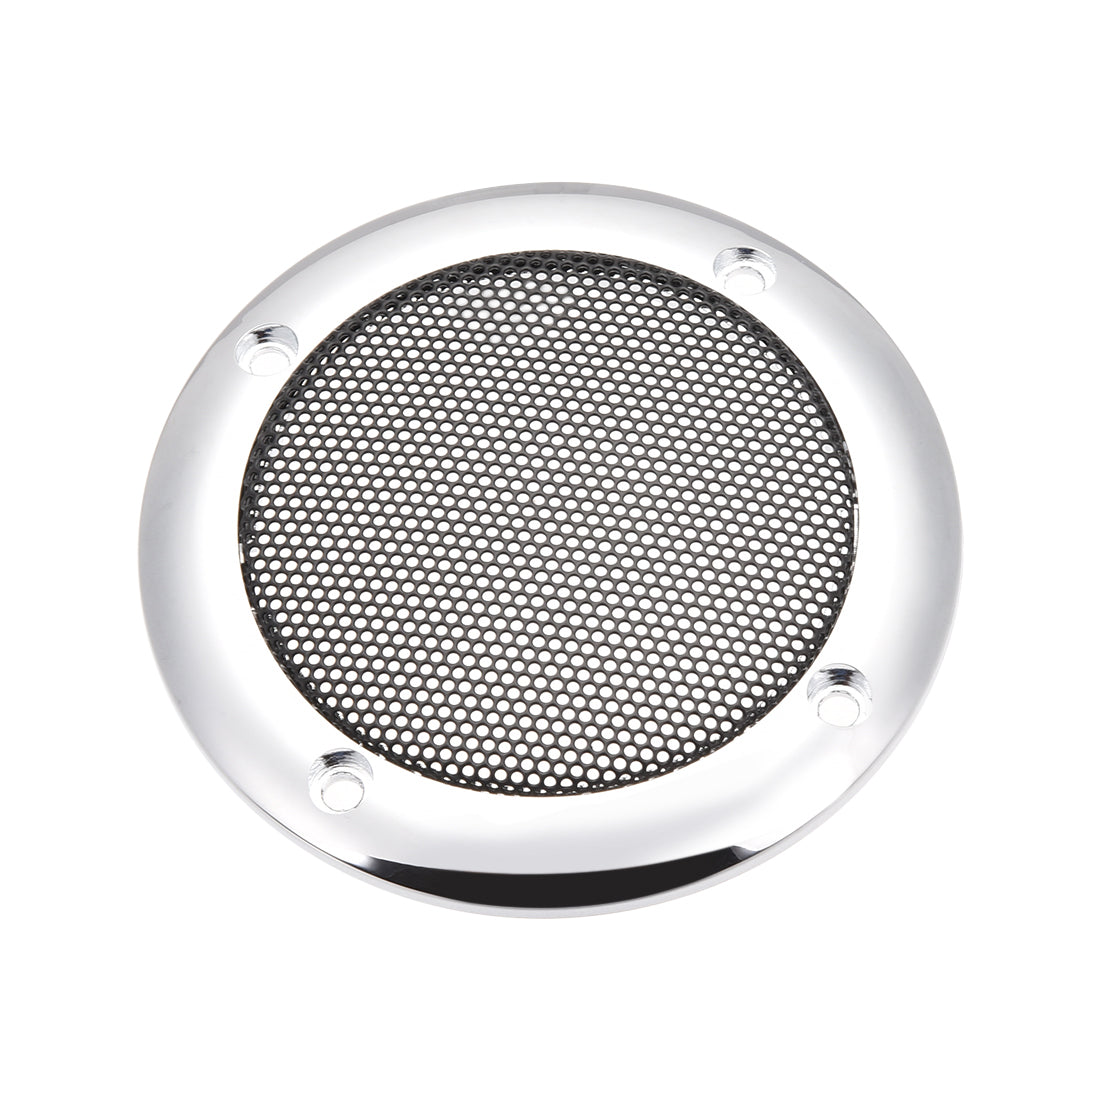 uxcell Uxcell Speaker Grill Cover 3.5 Inch 107mm Mesh Decorative Circle Subwoofer Guard Protector Silver